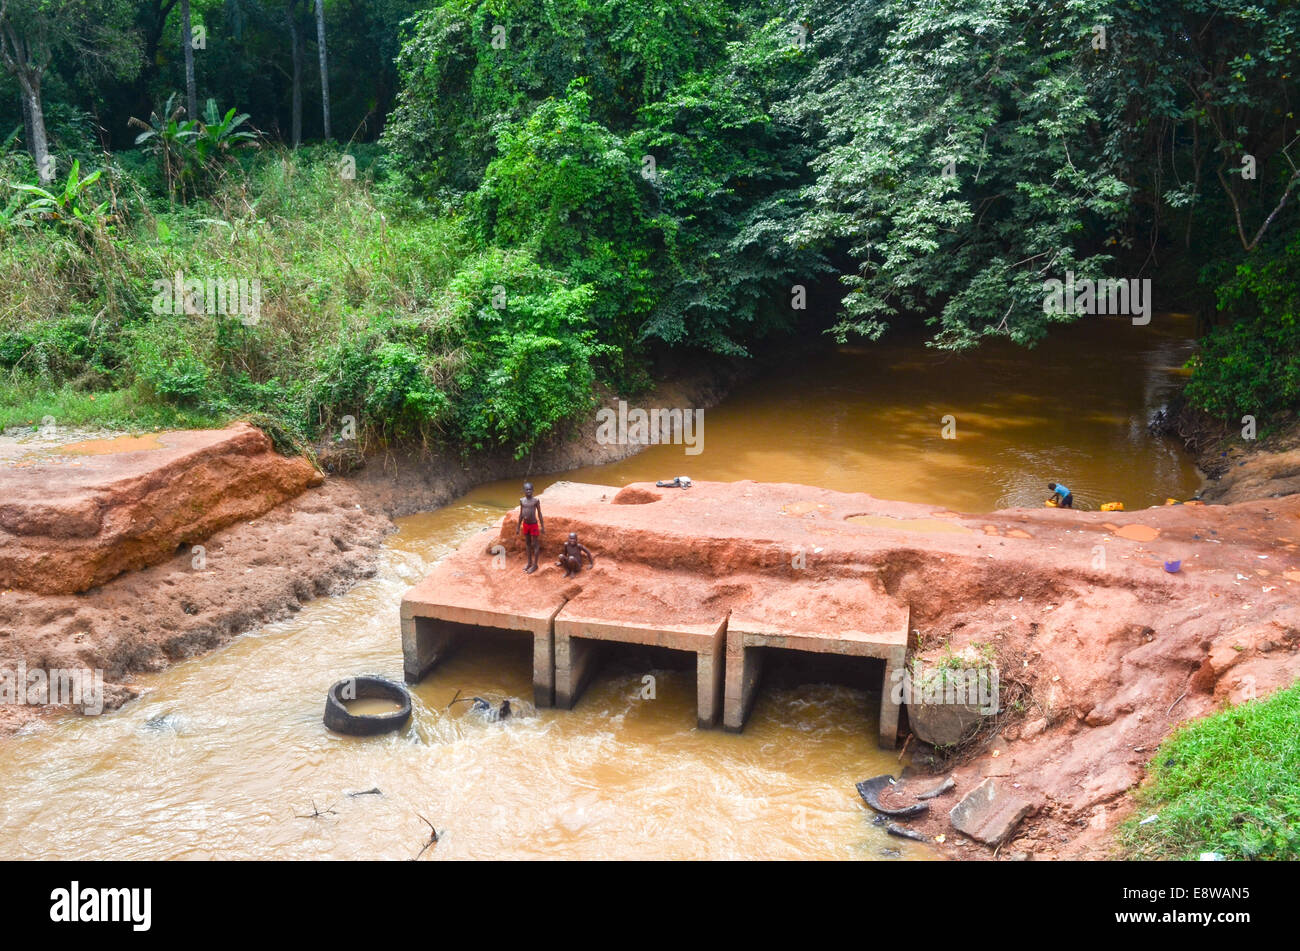 Poor infrastructure in Nigeria, dirt roads, floods and kids playing with unfinished bridges Stock Photo